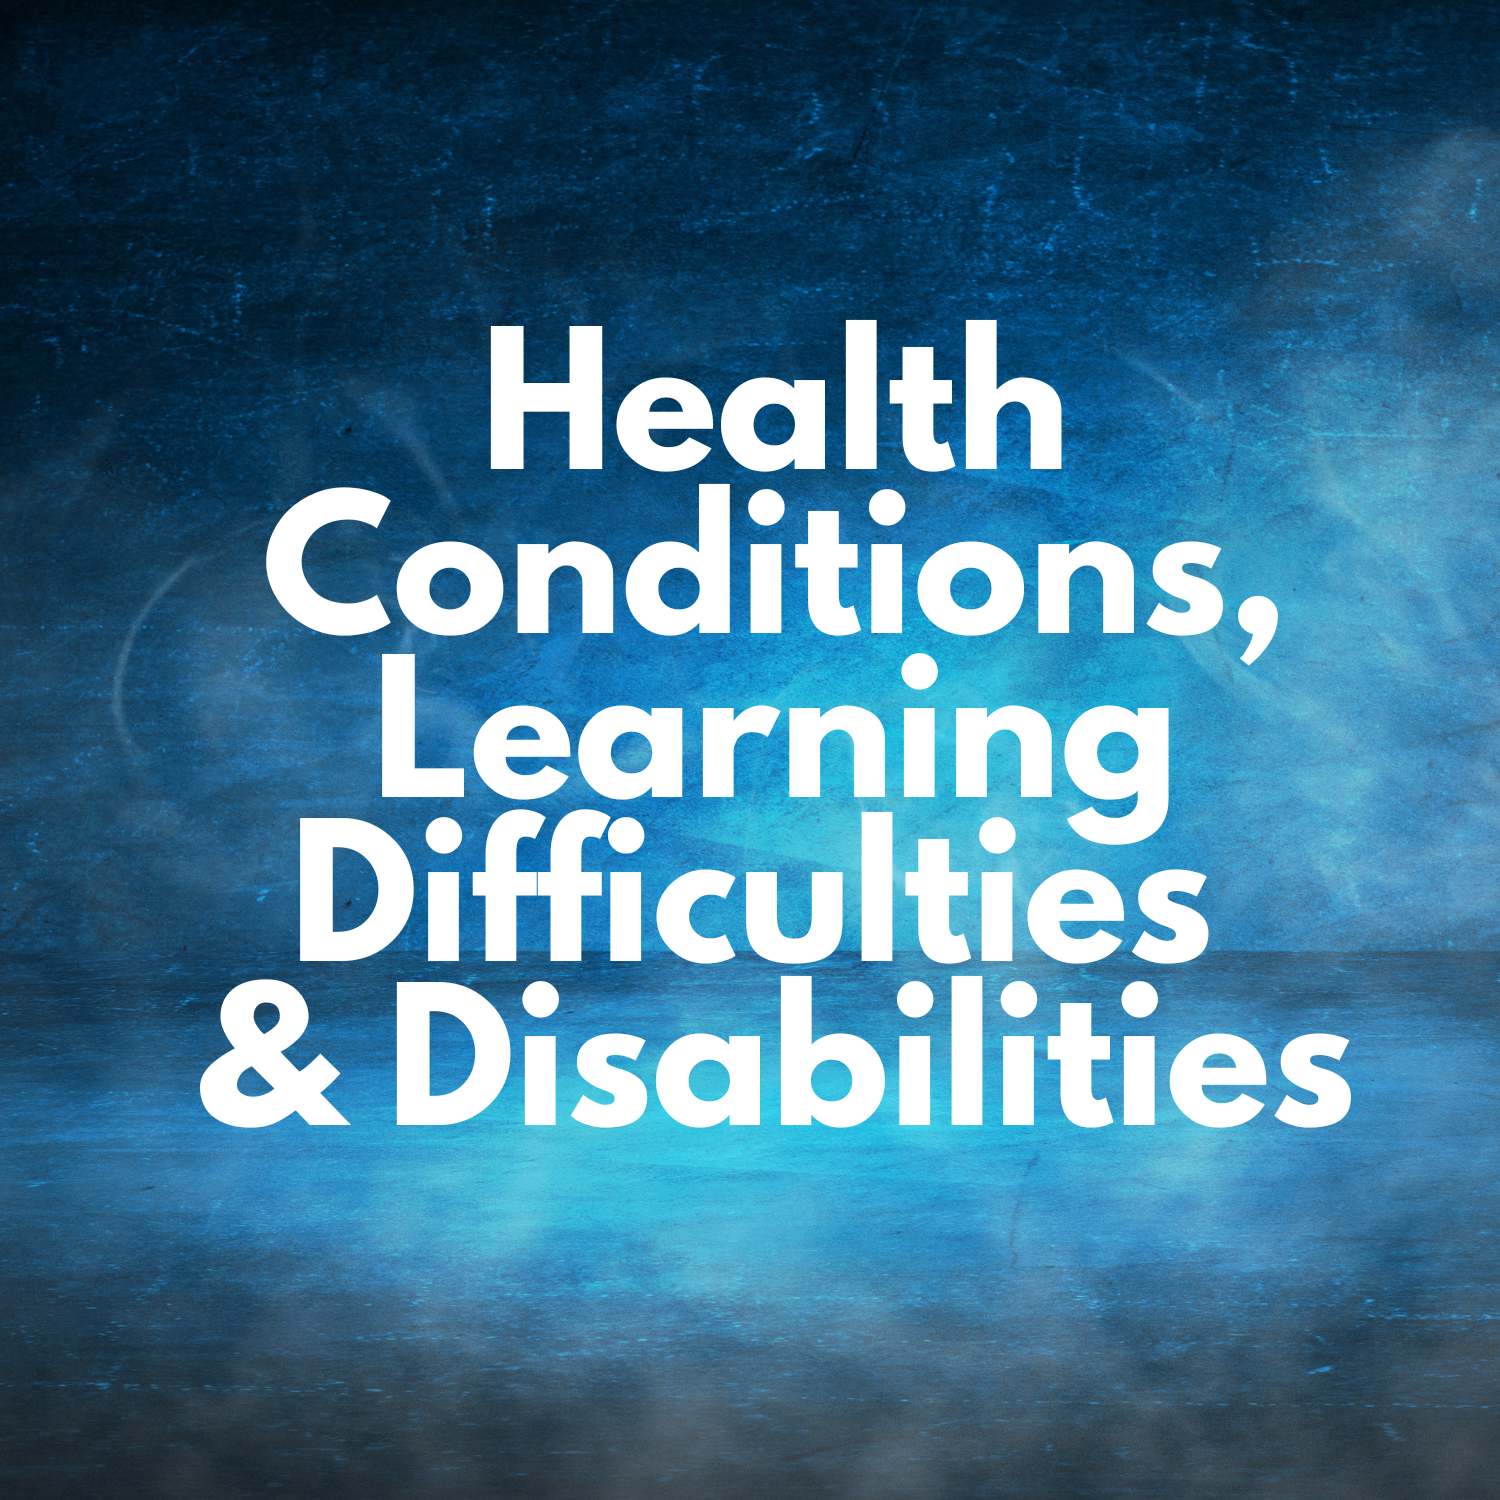 Health conditions, Learning Difficulties and disabilities